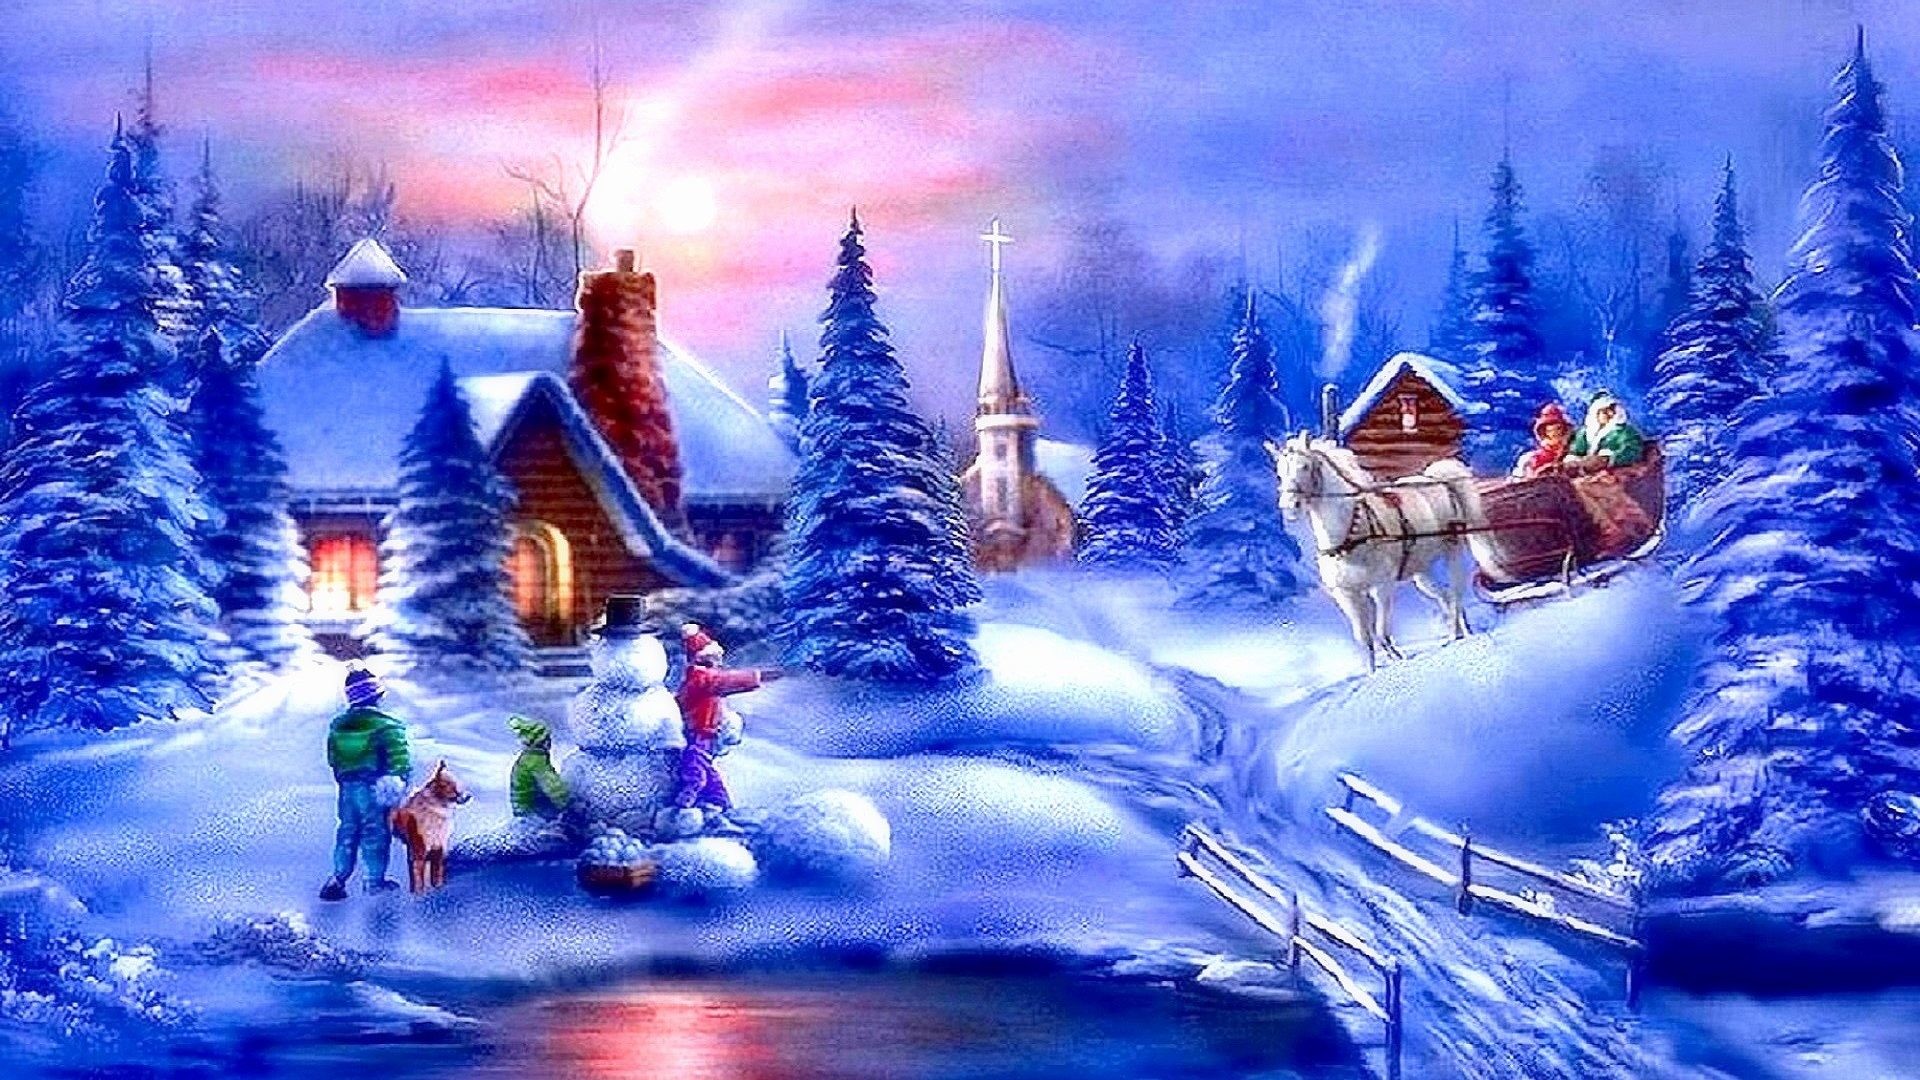 1920x1080 Holidays Tag - Carriage Greetings Winter Churches Creek Paintings Snowman  Horse Cottages Snow Love Year Seasons